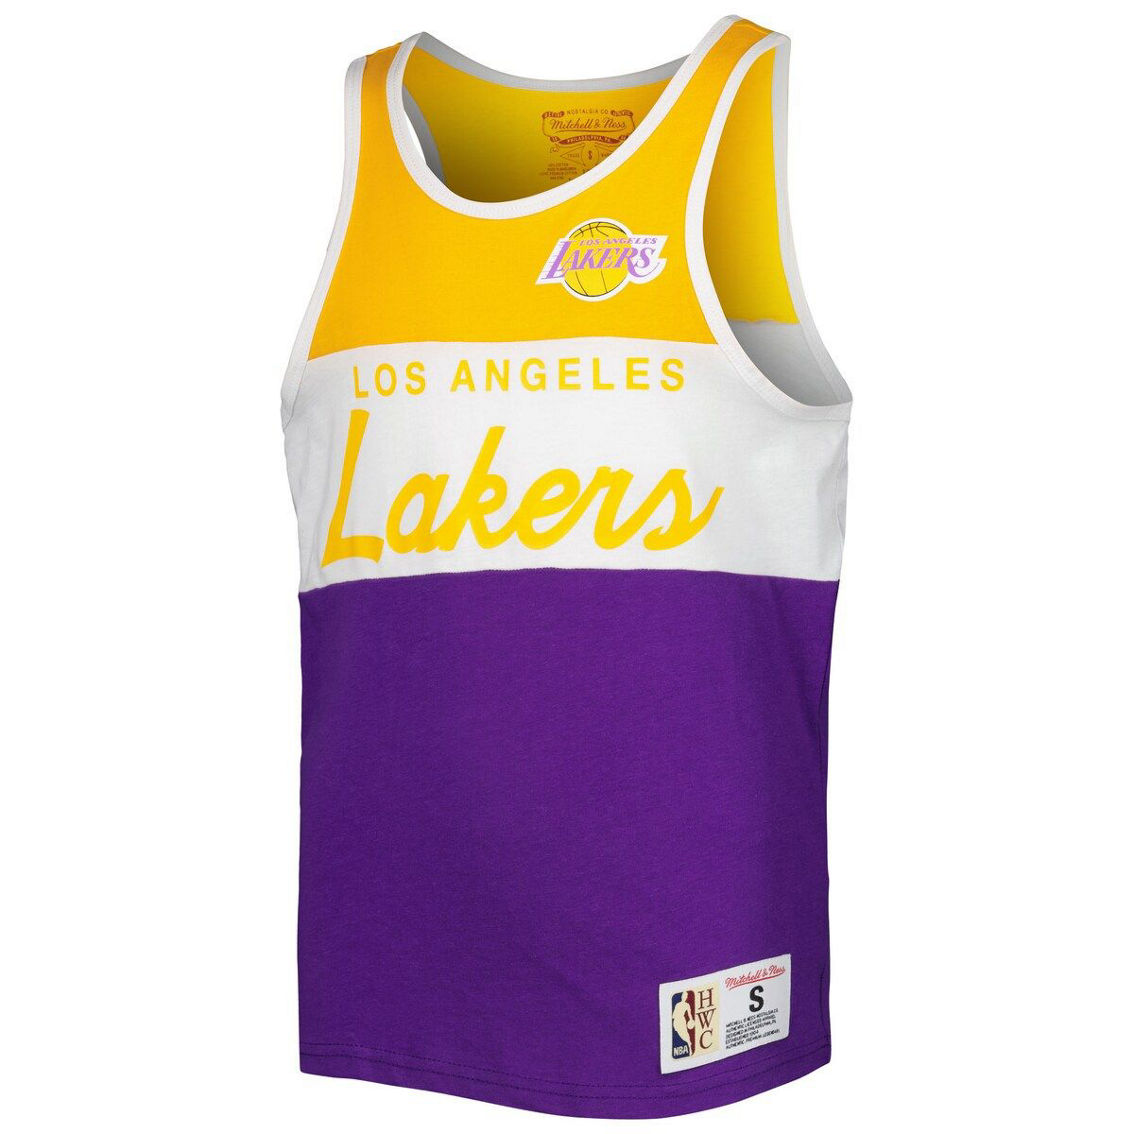 Mitchell & Ness Youth Purple/Gold Los Angeles Lakers Hardwood Classics Special Script Tank Top - Image 3 of 4